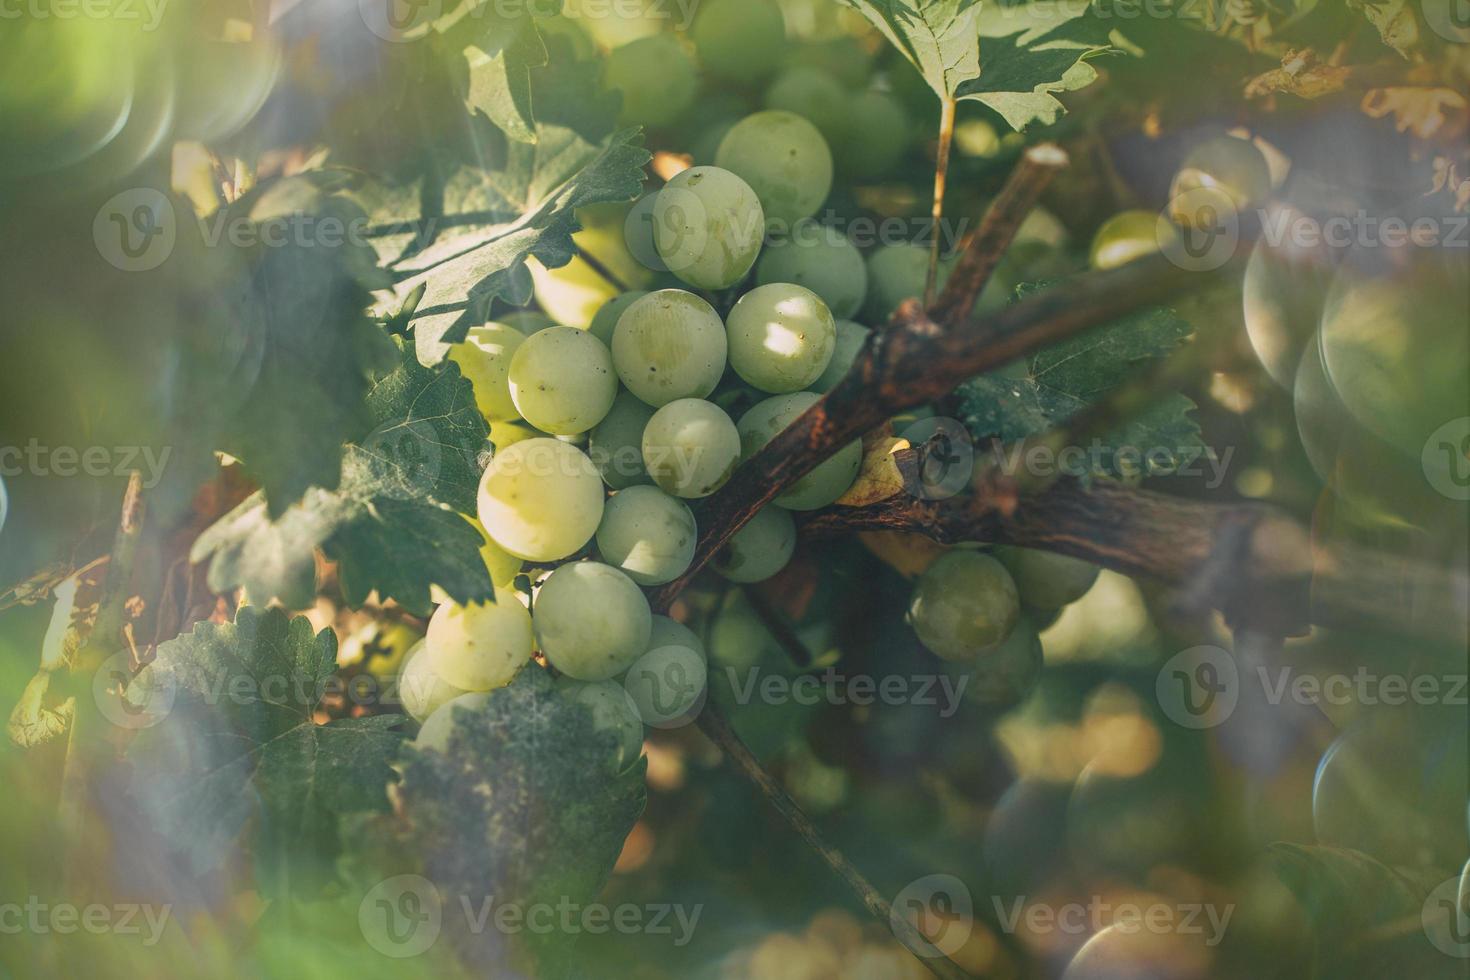 ripe green grapes on a vine in a vineyard on a warm autumn day in close-up photo